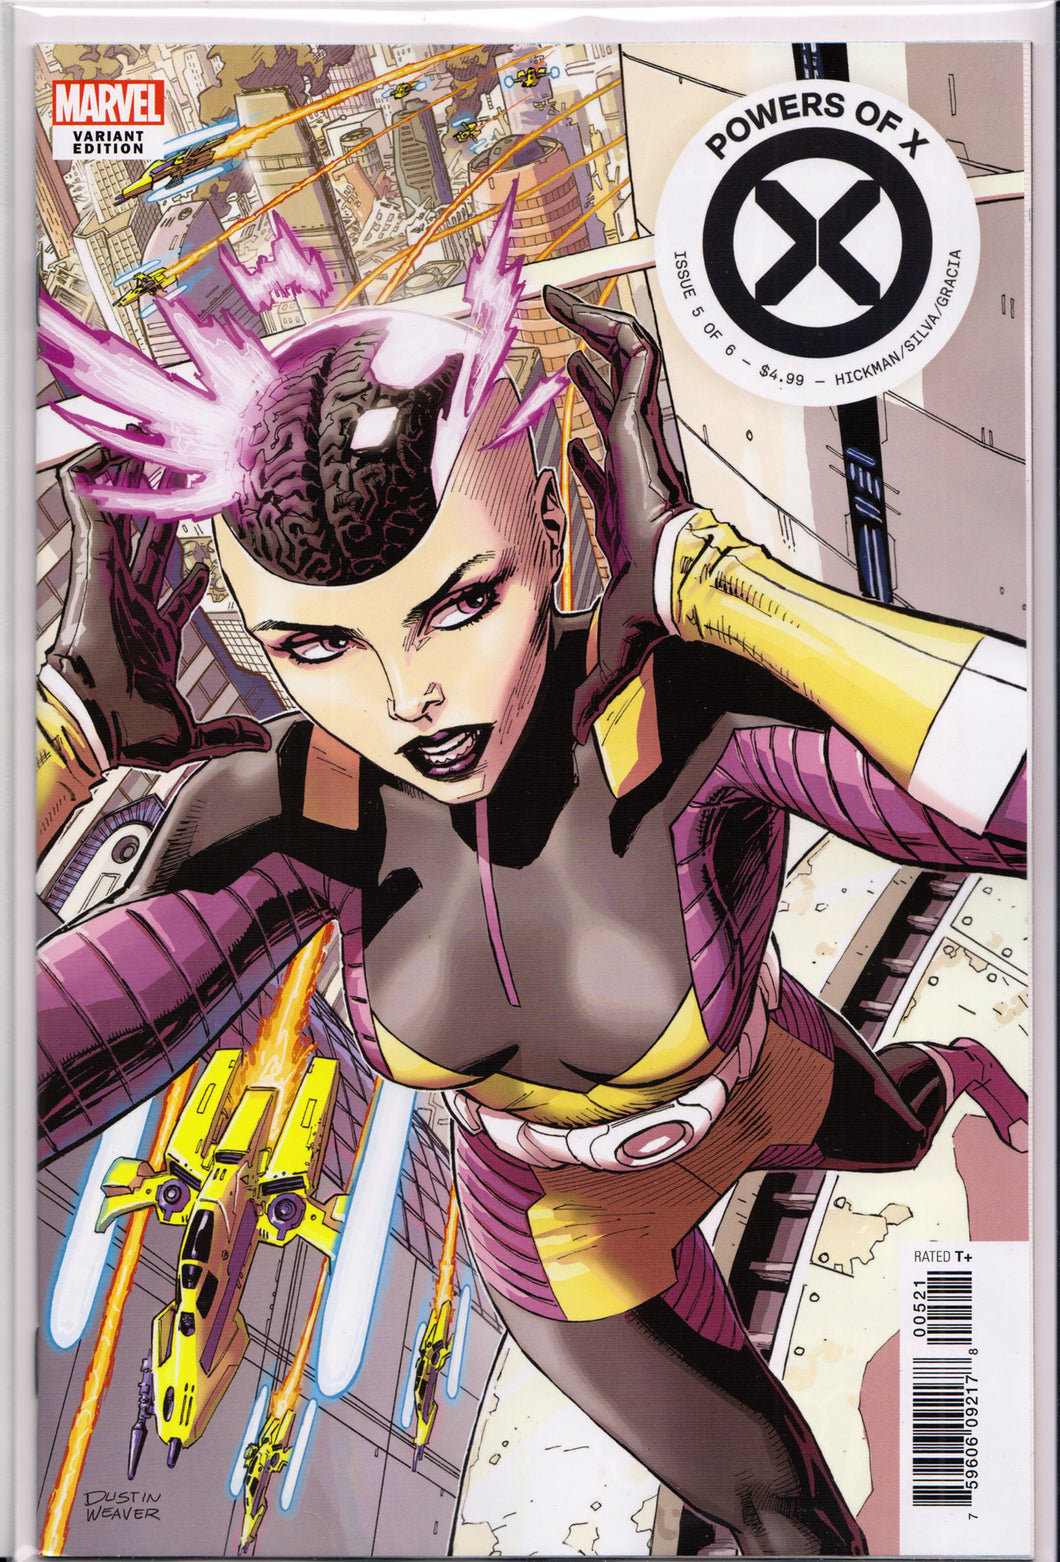 POWERS OF X #5 (NEW CHARACTER VARIANT) ~ Marvel Comics